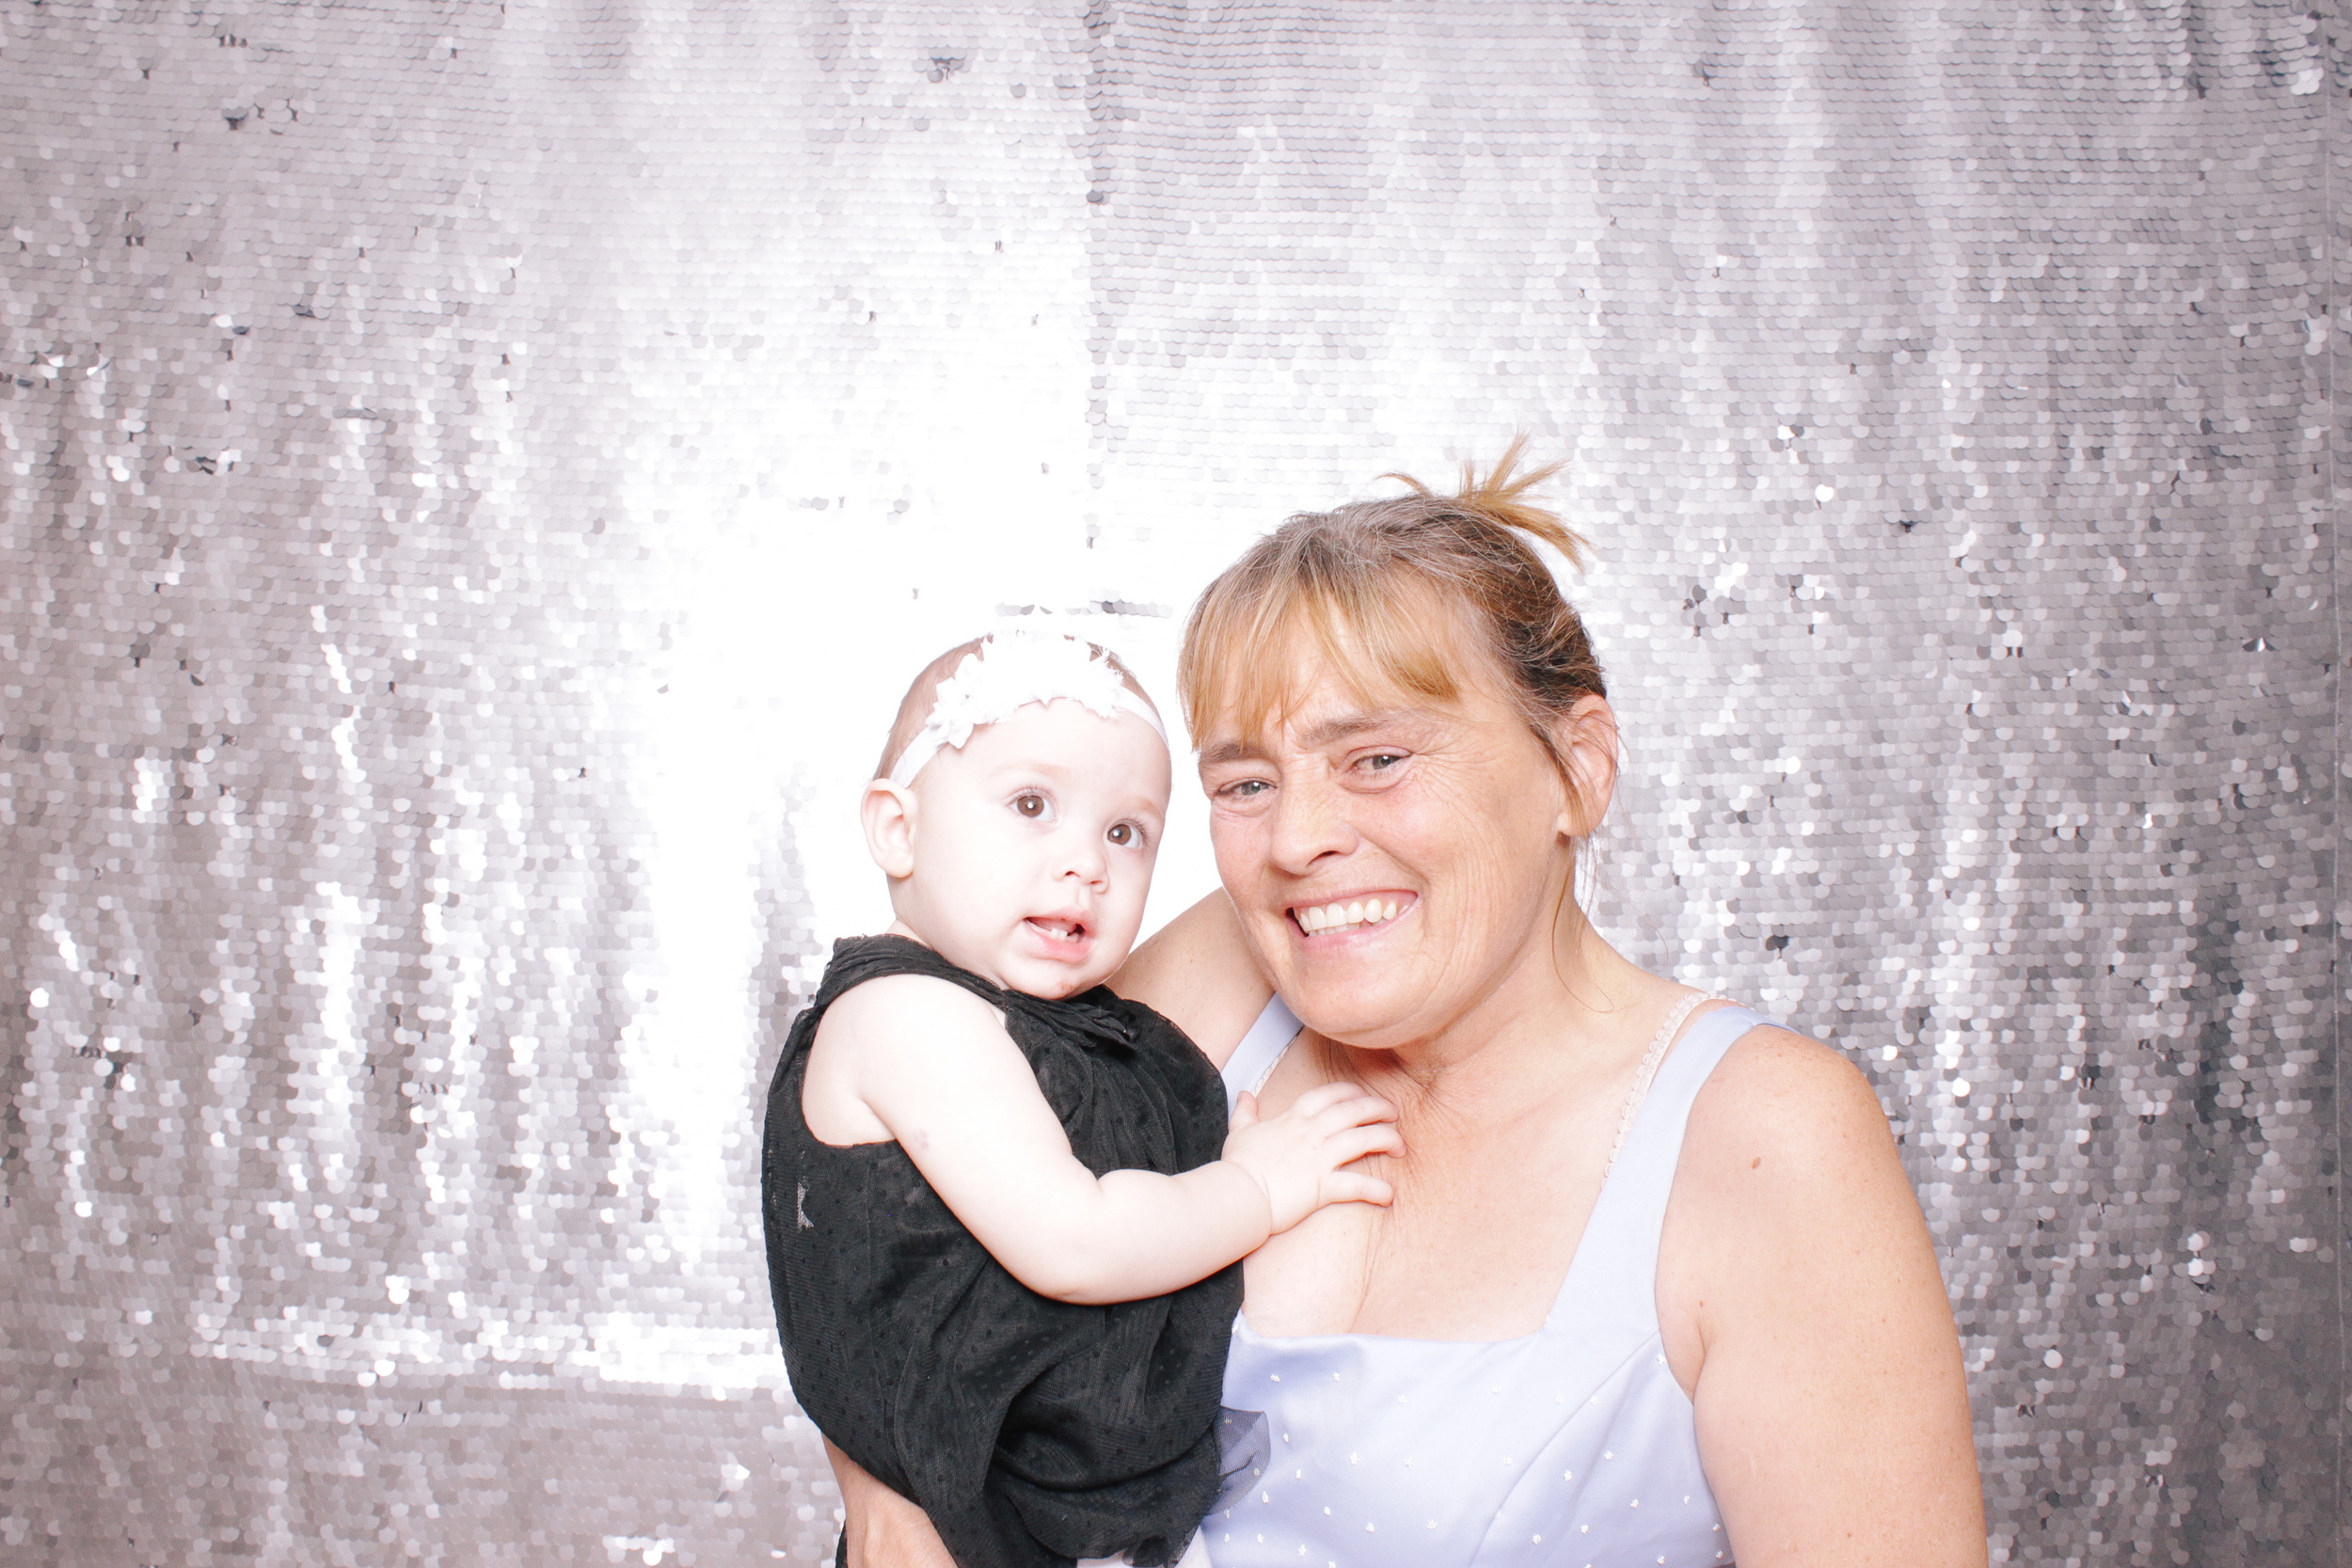 00202-Megs Sweet 16 Birthday Photo Booth in Cleveland-20150418.jpg